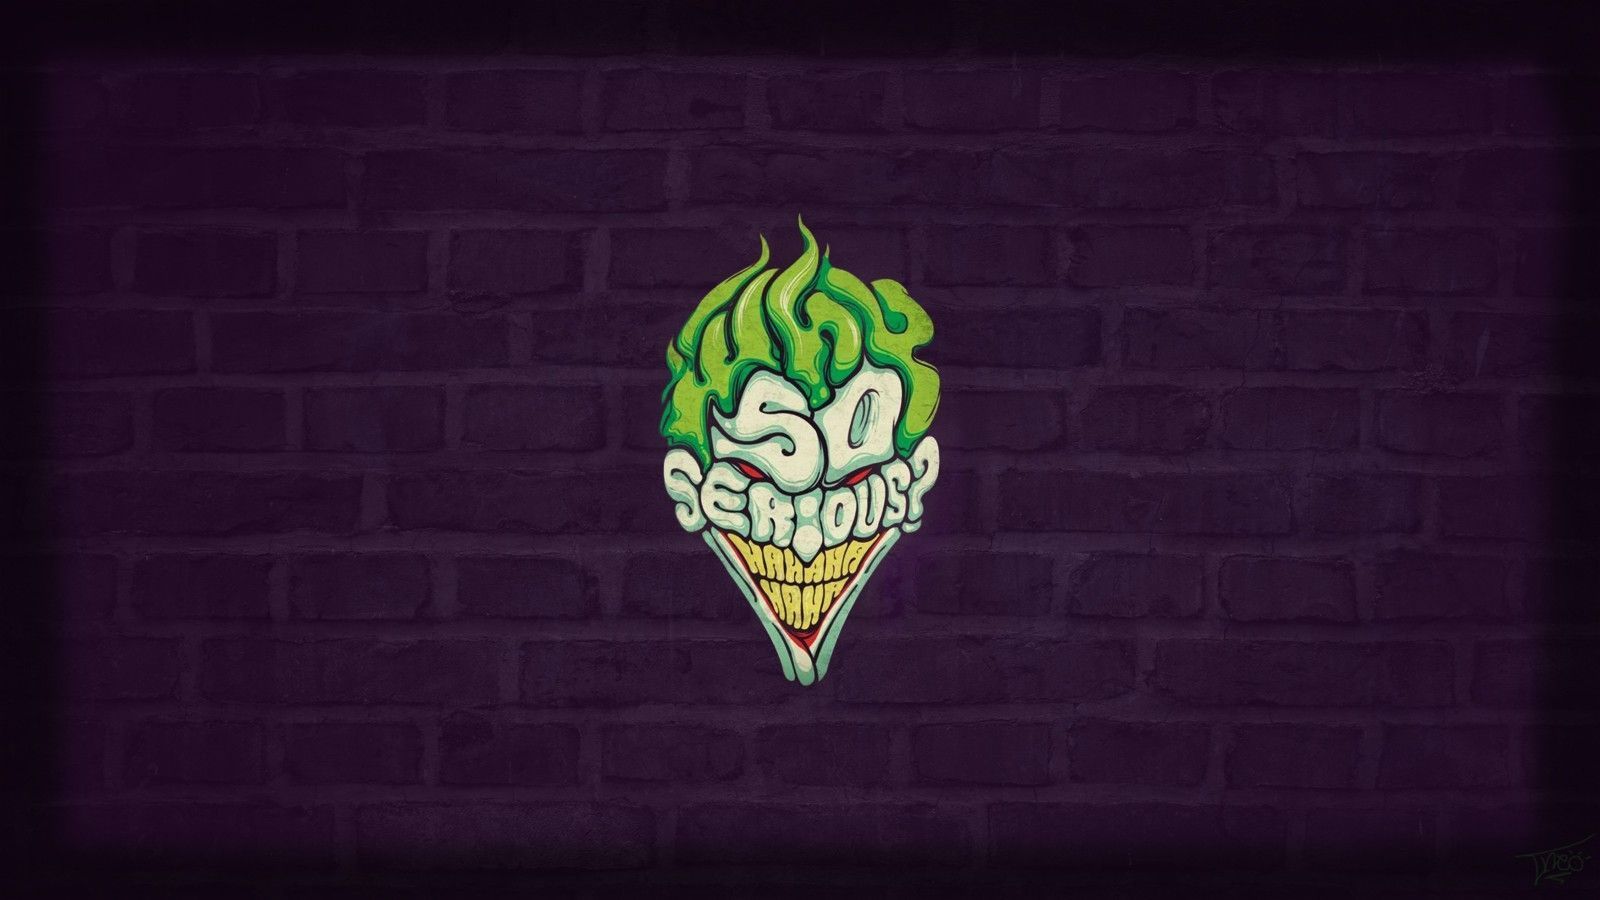 Joker Purple And Green Android Background. Joker wallpaper, Joker HD wallpaper, 2048x1152 wallpaper